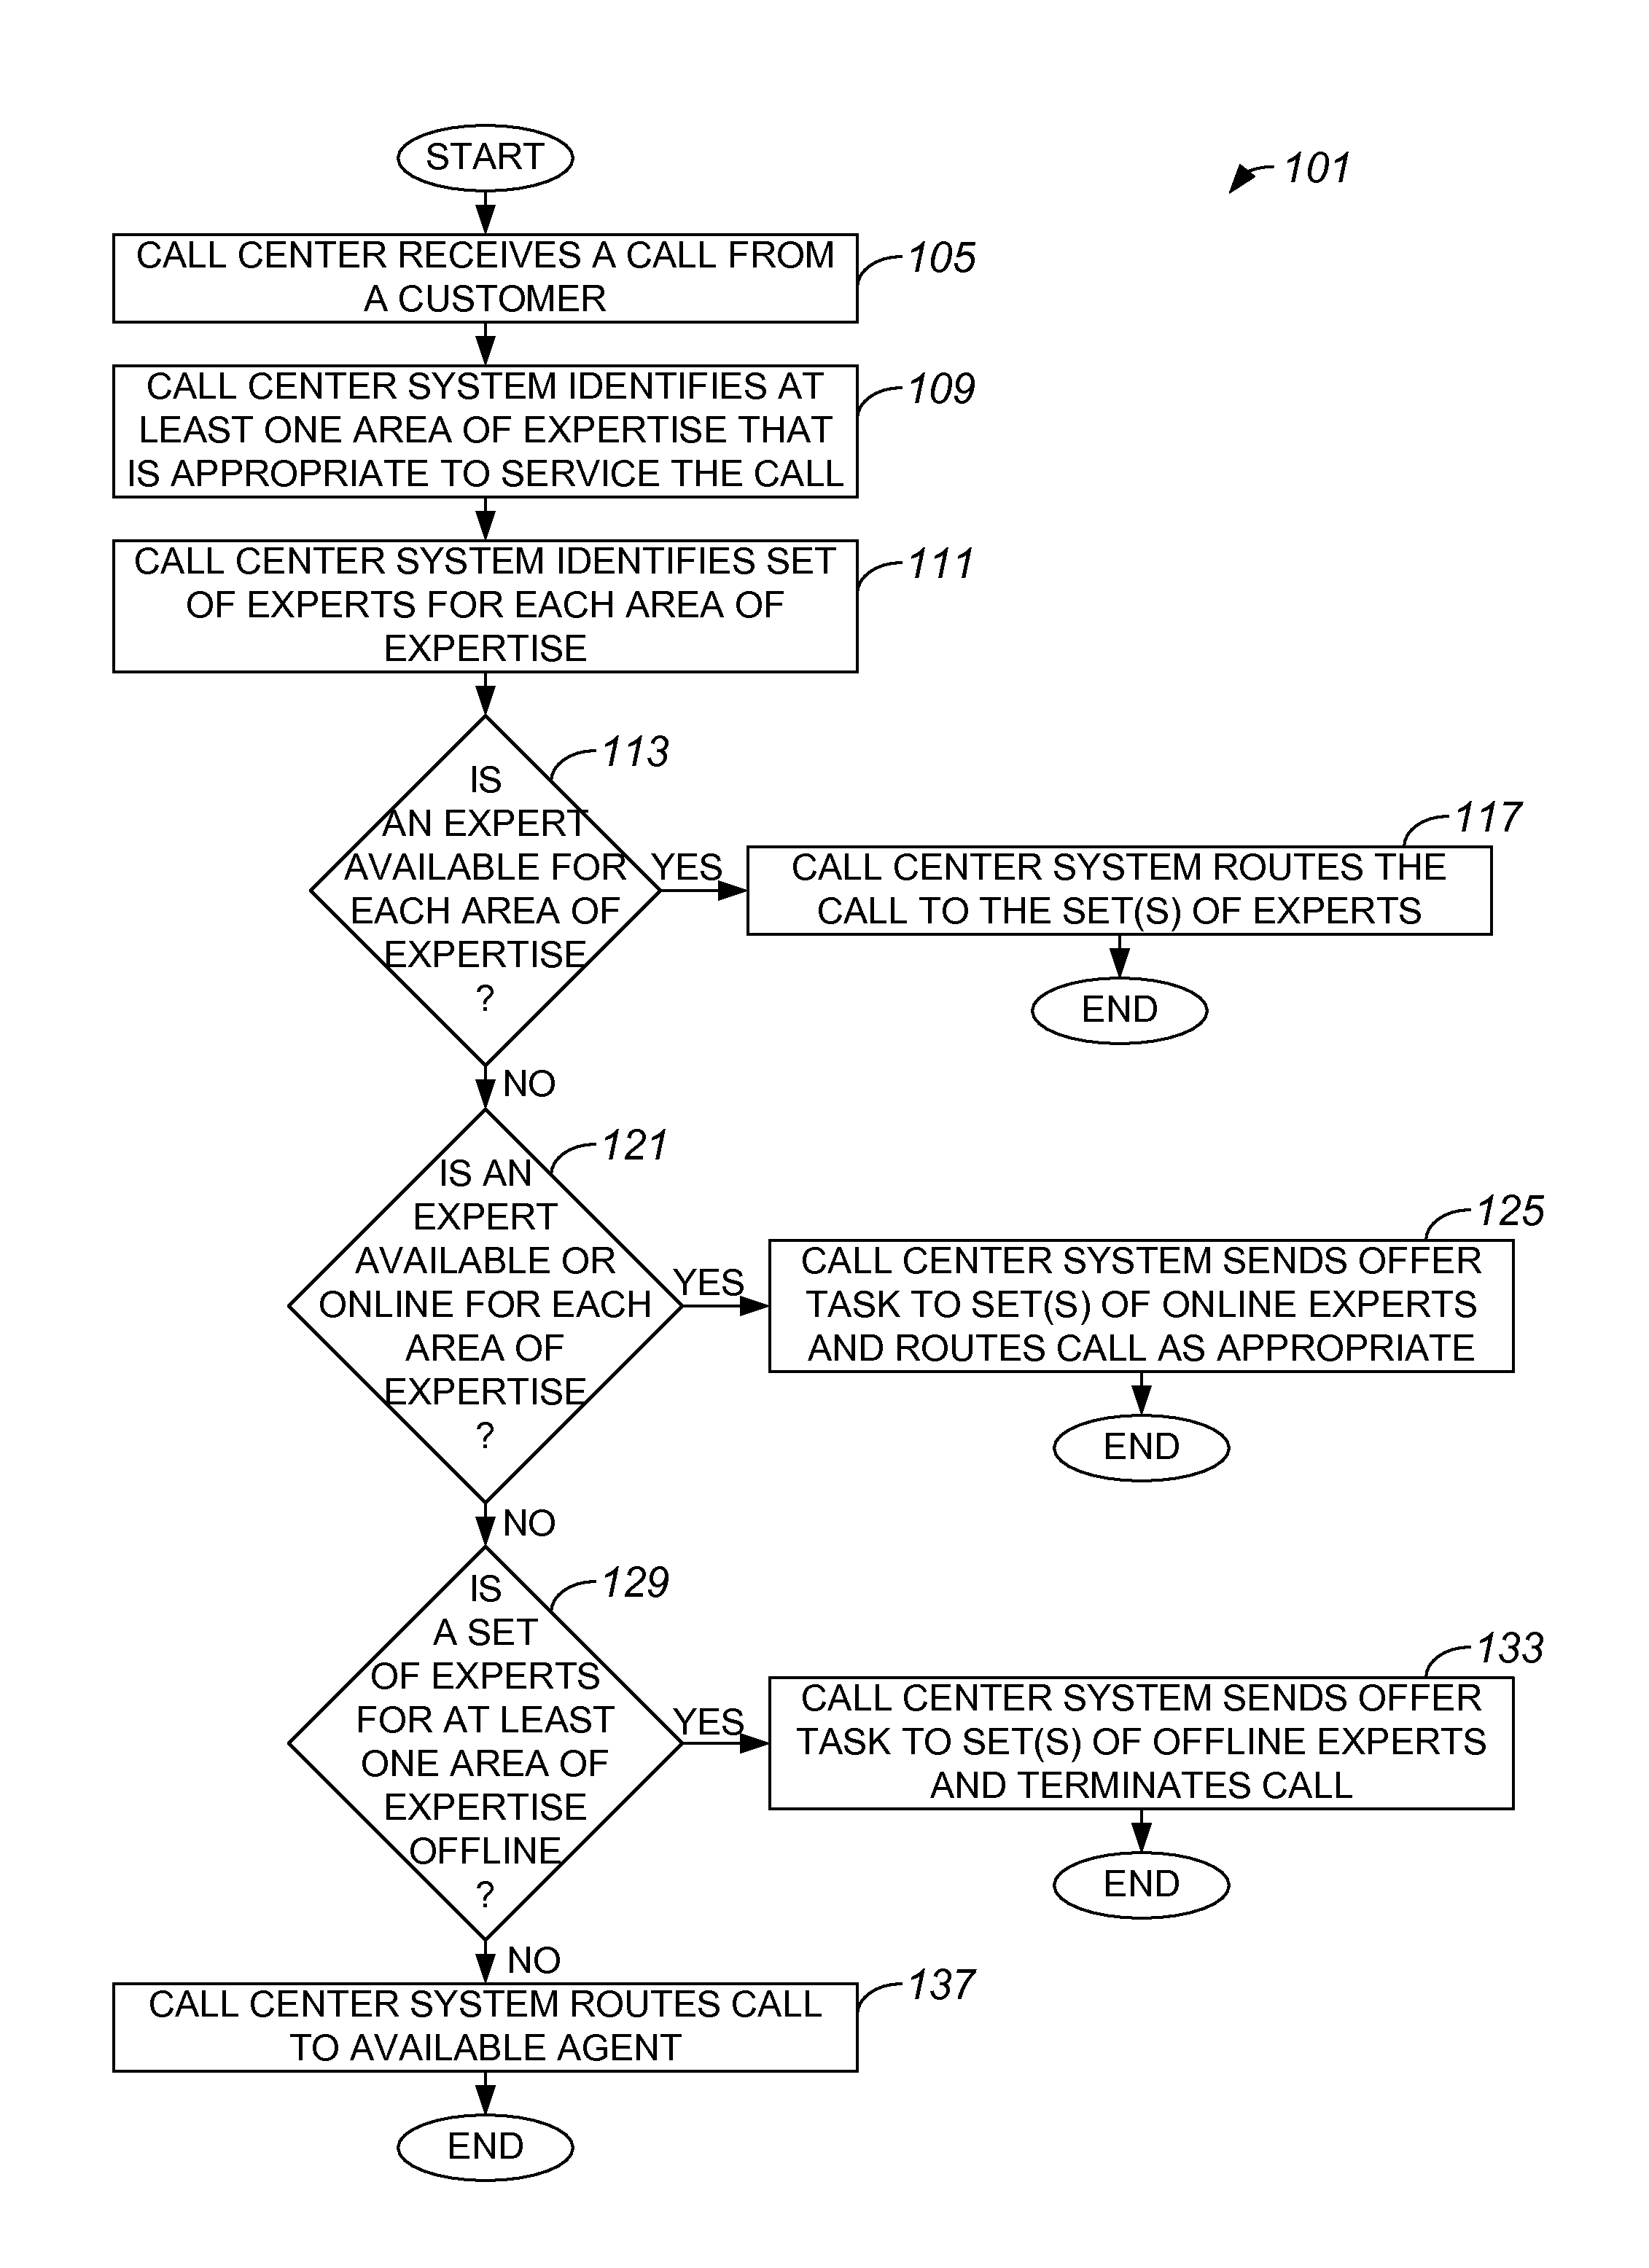 Method and apparatus for scheduling callbacks via offline offer tasks to knowledge workers